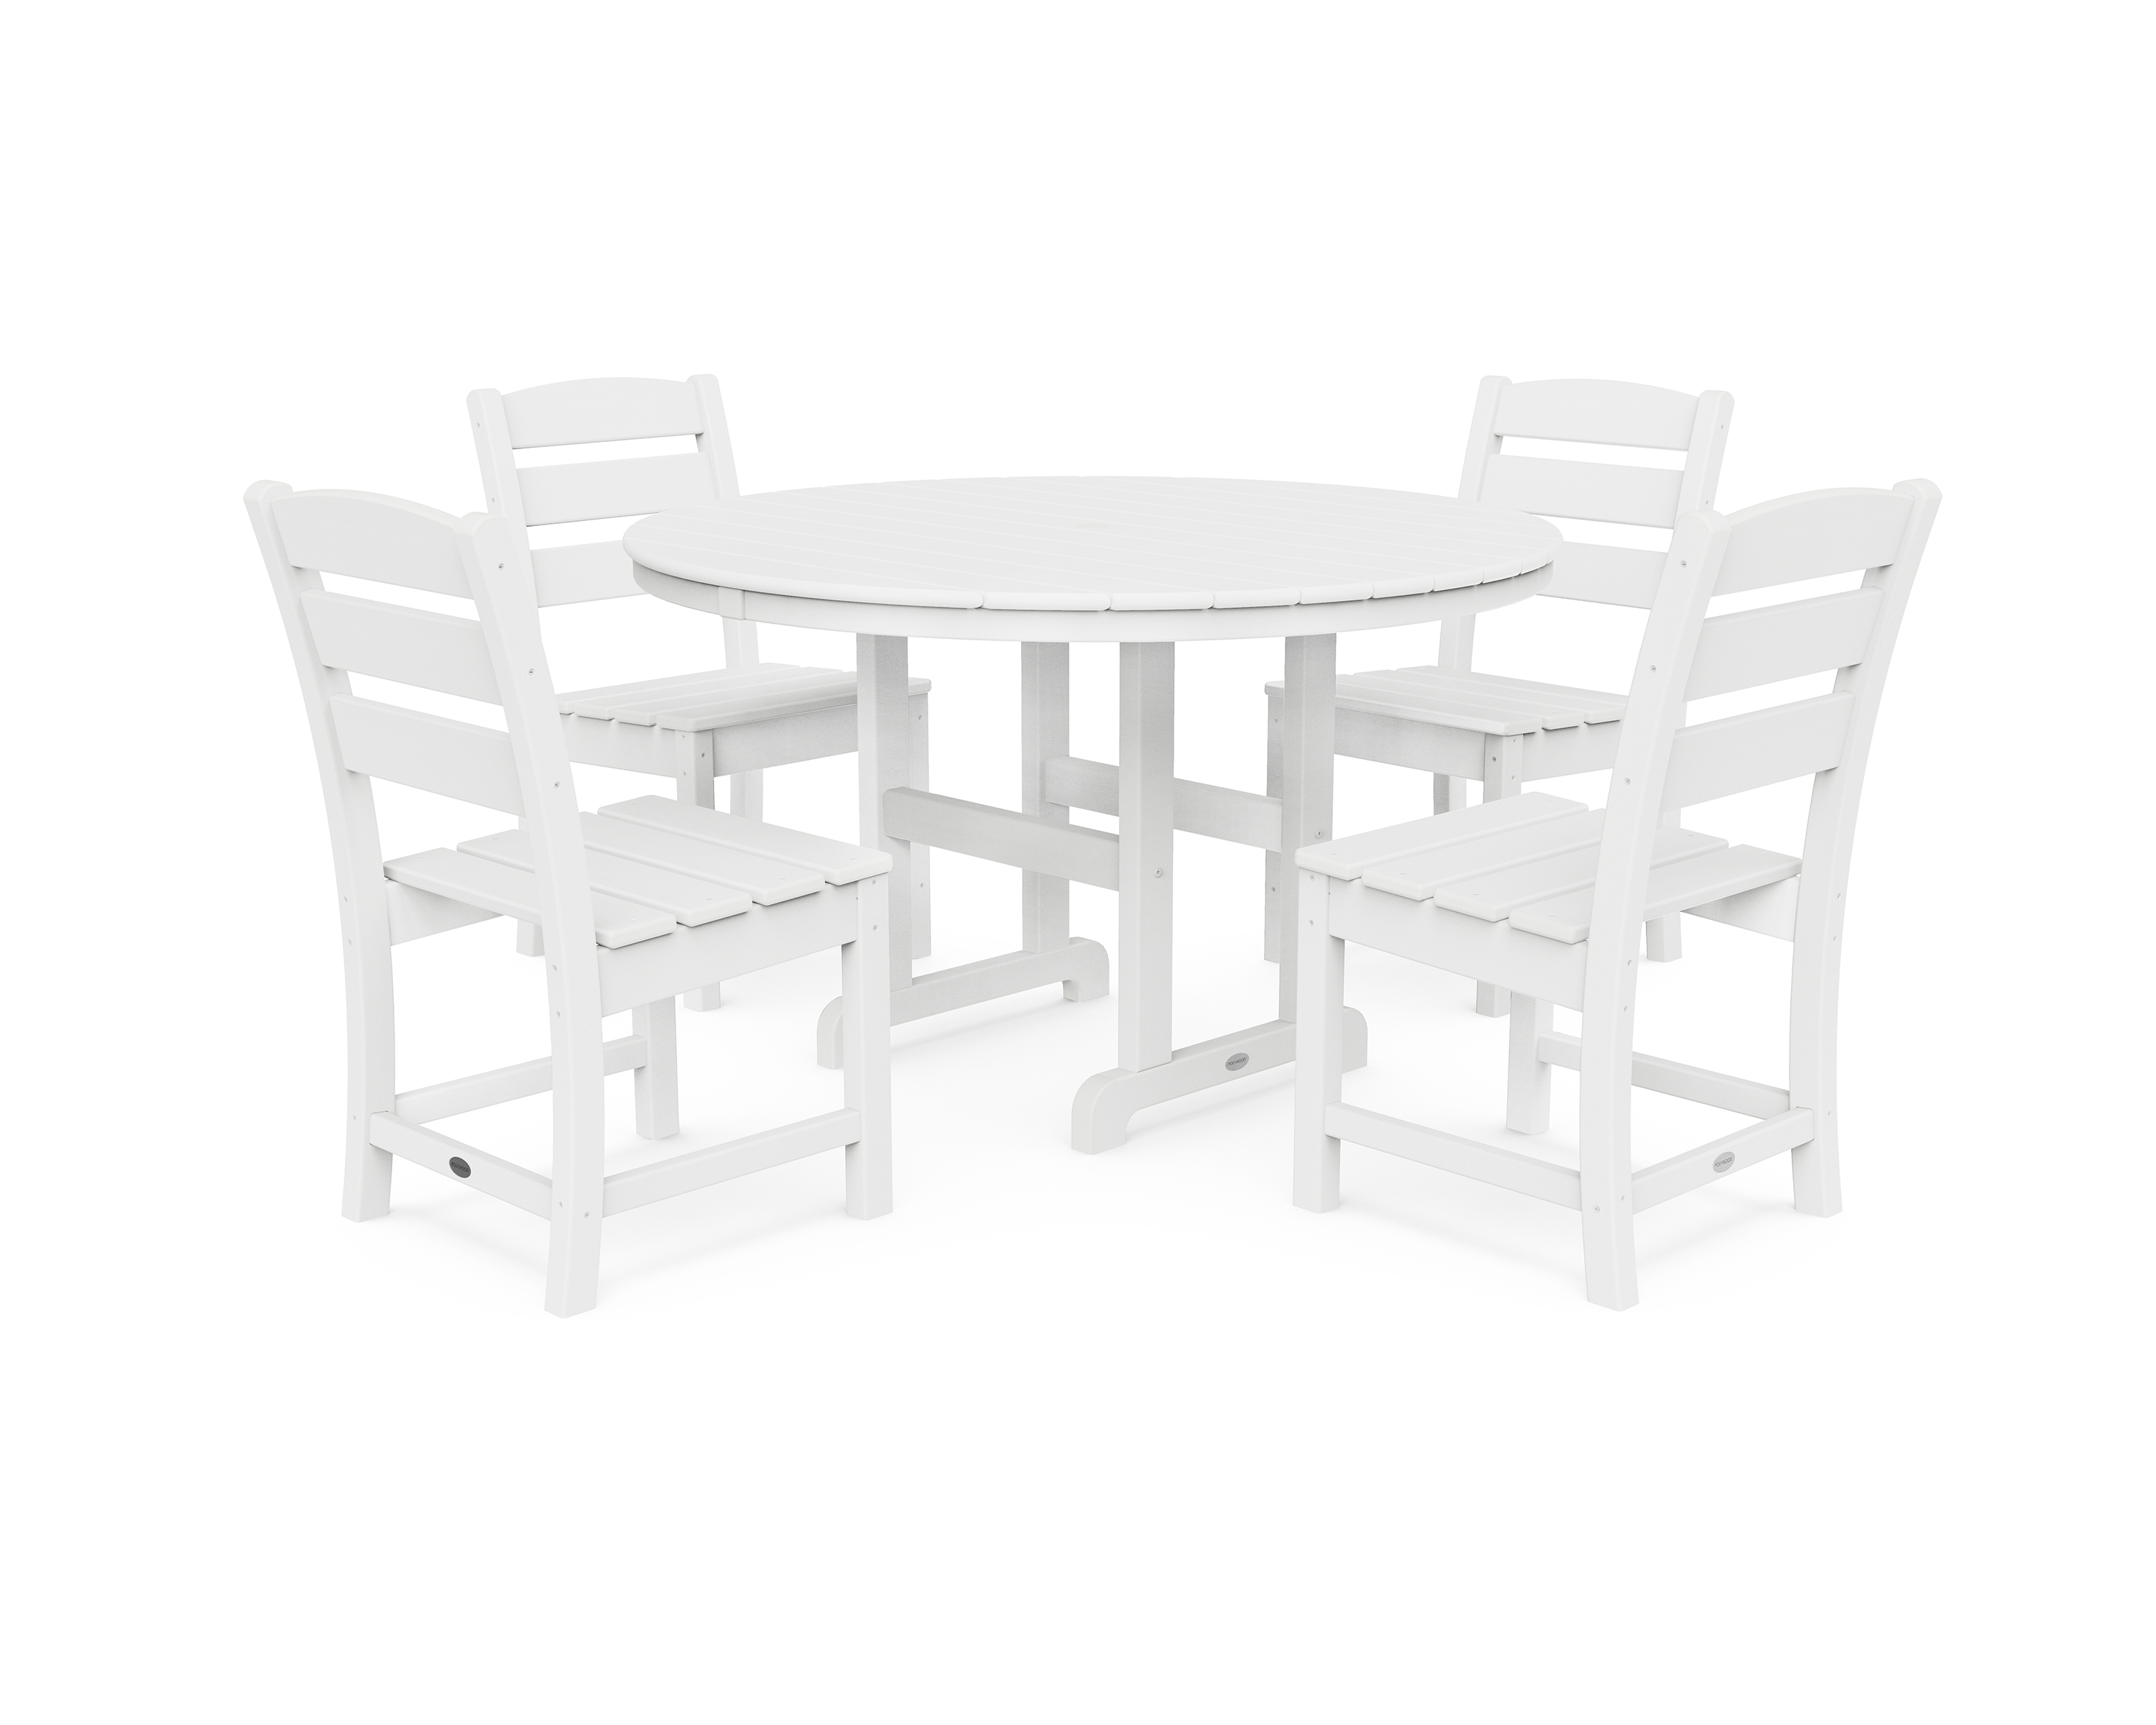 POLYWOOD Lakeside 5-Piece Round Side Chair Dining Set in White - image 1 of 1